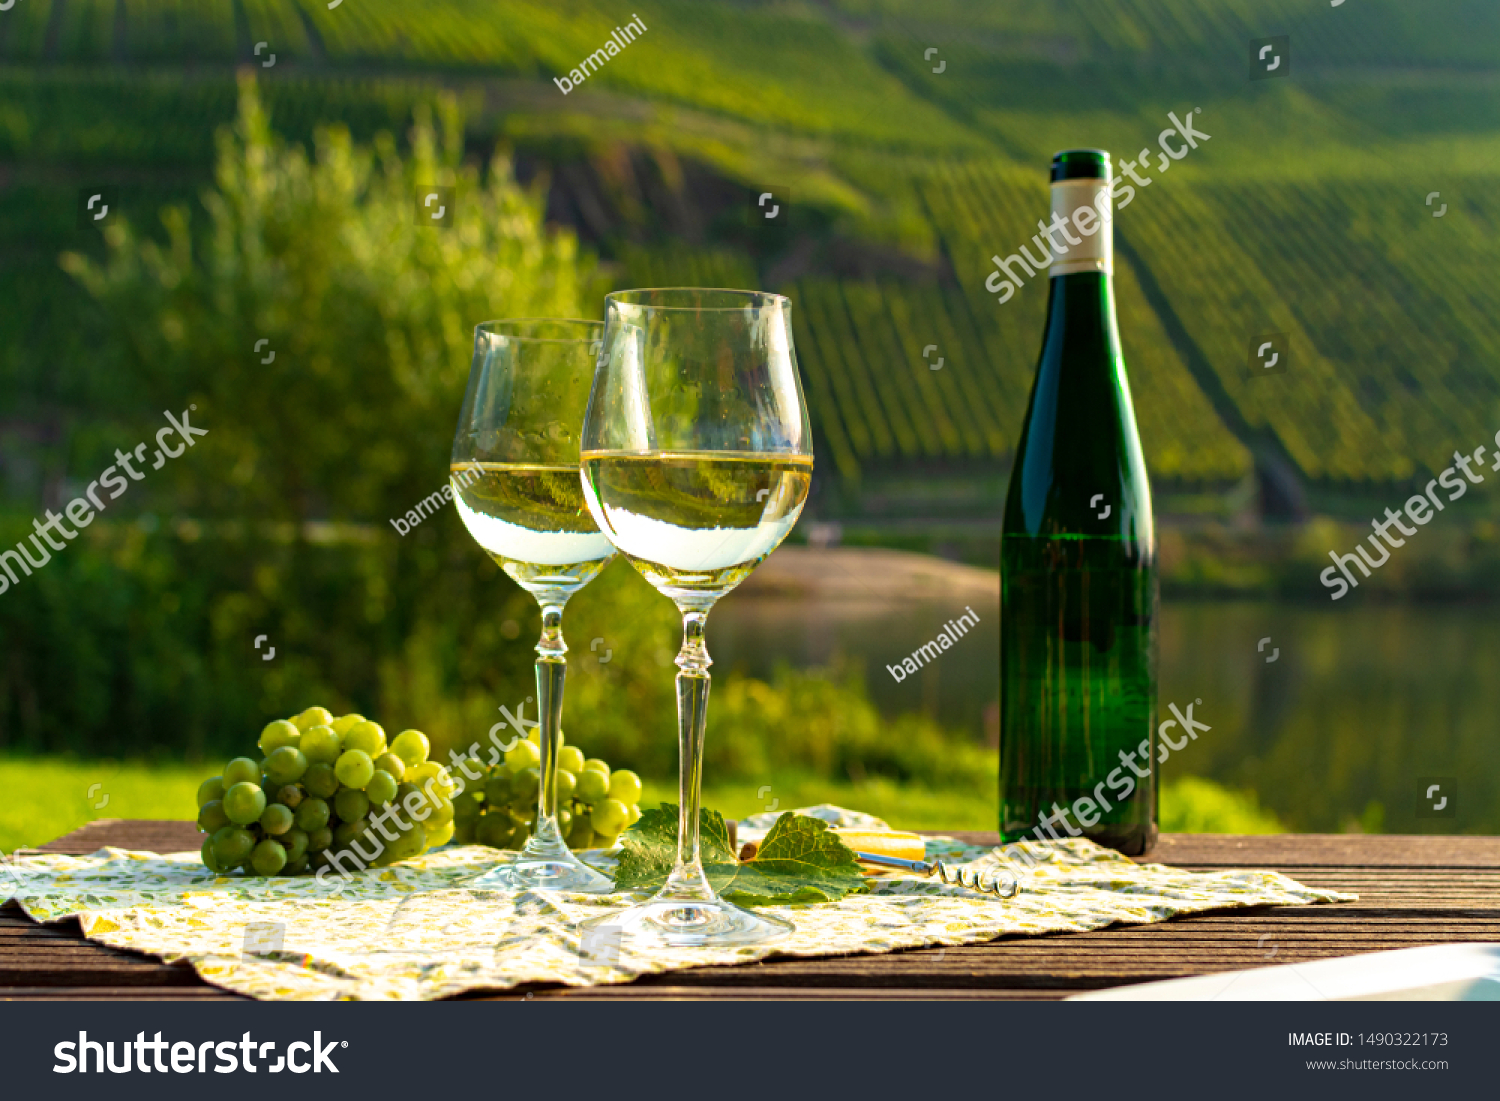 Famous German quality white wine riesling, produced in Mosel wine regio from white grapes growing on slopes of hills in Mosel river valley in Germany, bottle and glasses served outside in Mosel valley #1490322173